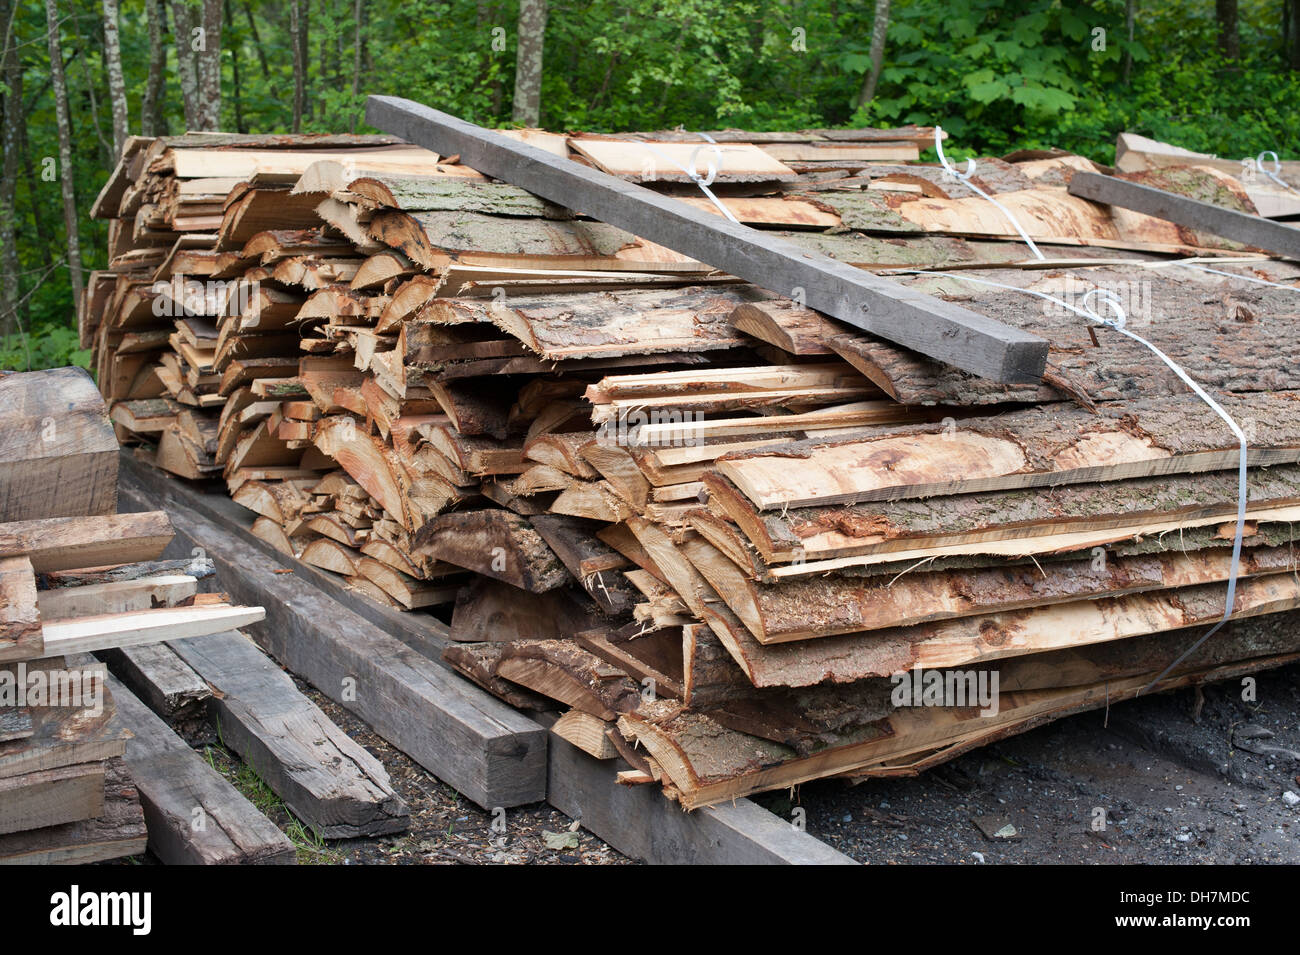 Tree Trunks cut into Timber Wood planks saw mill Stock Photo